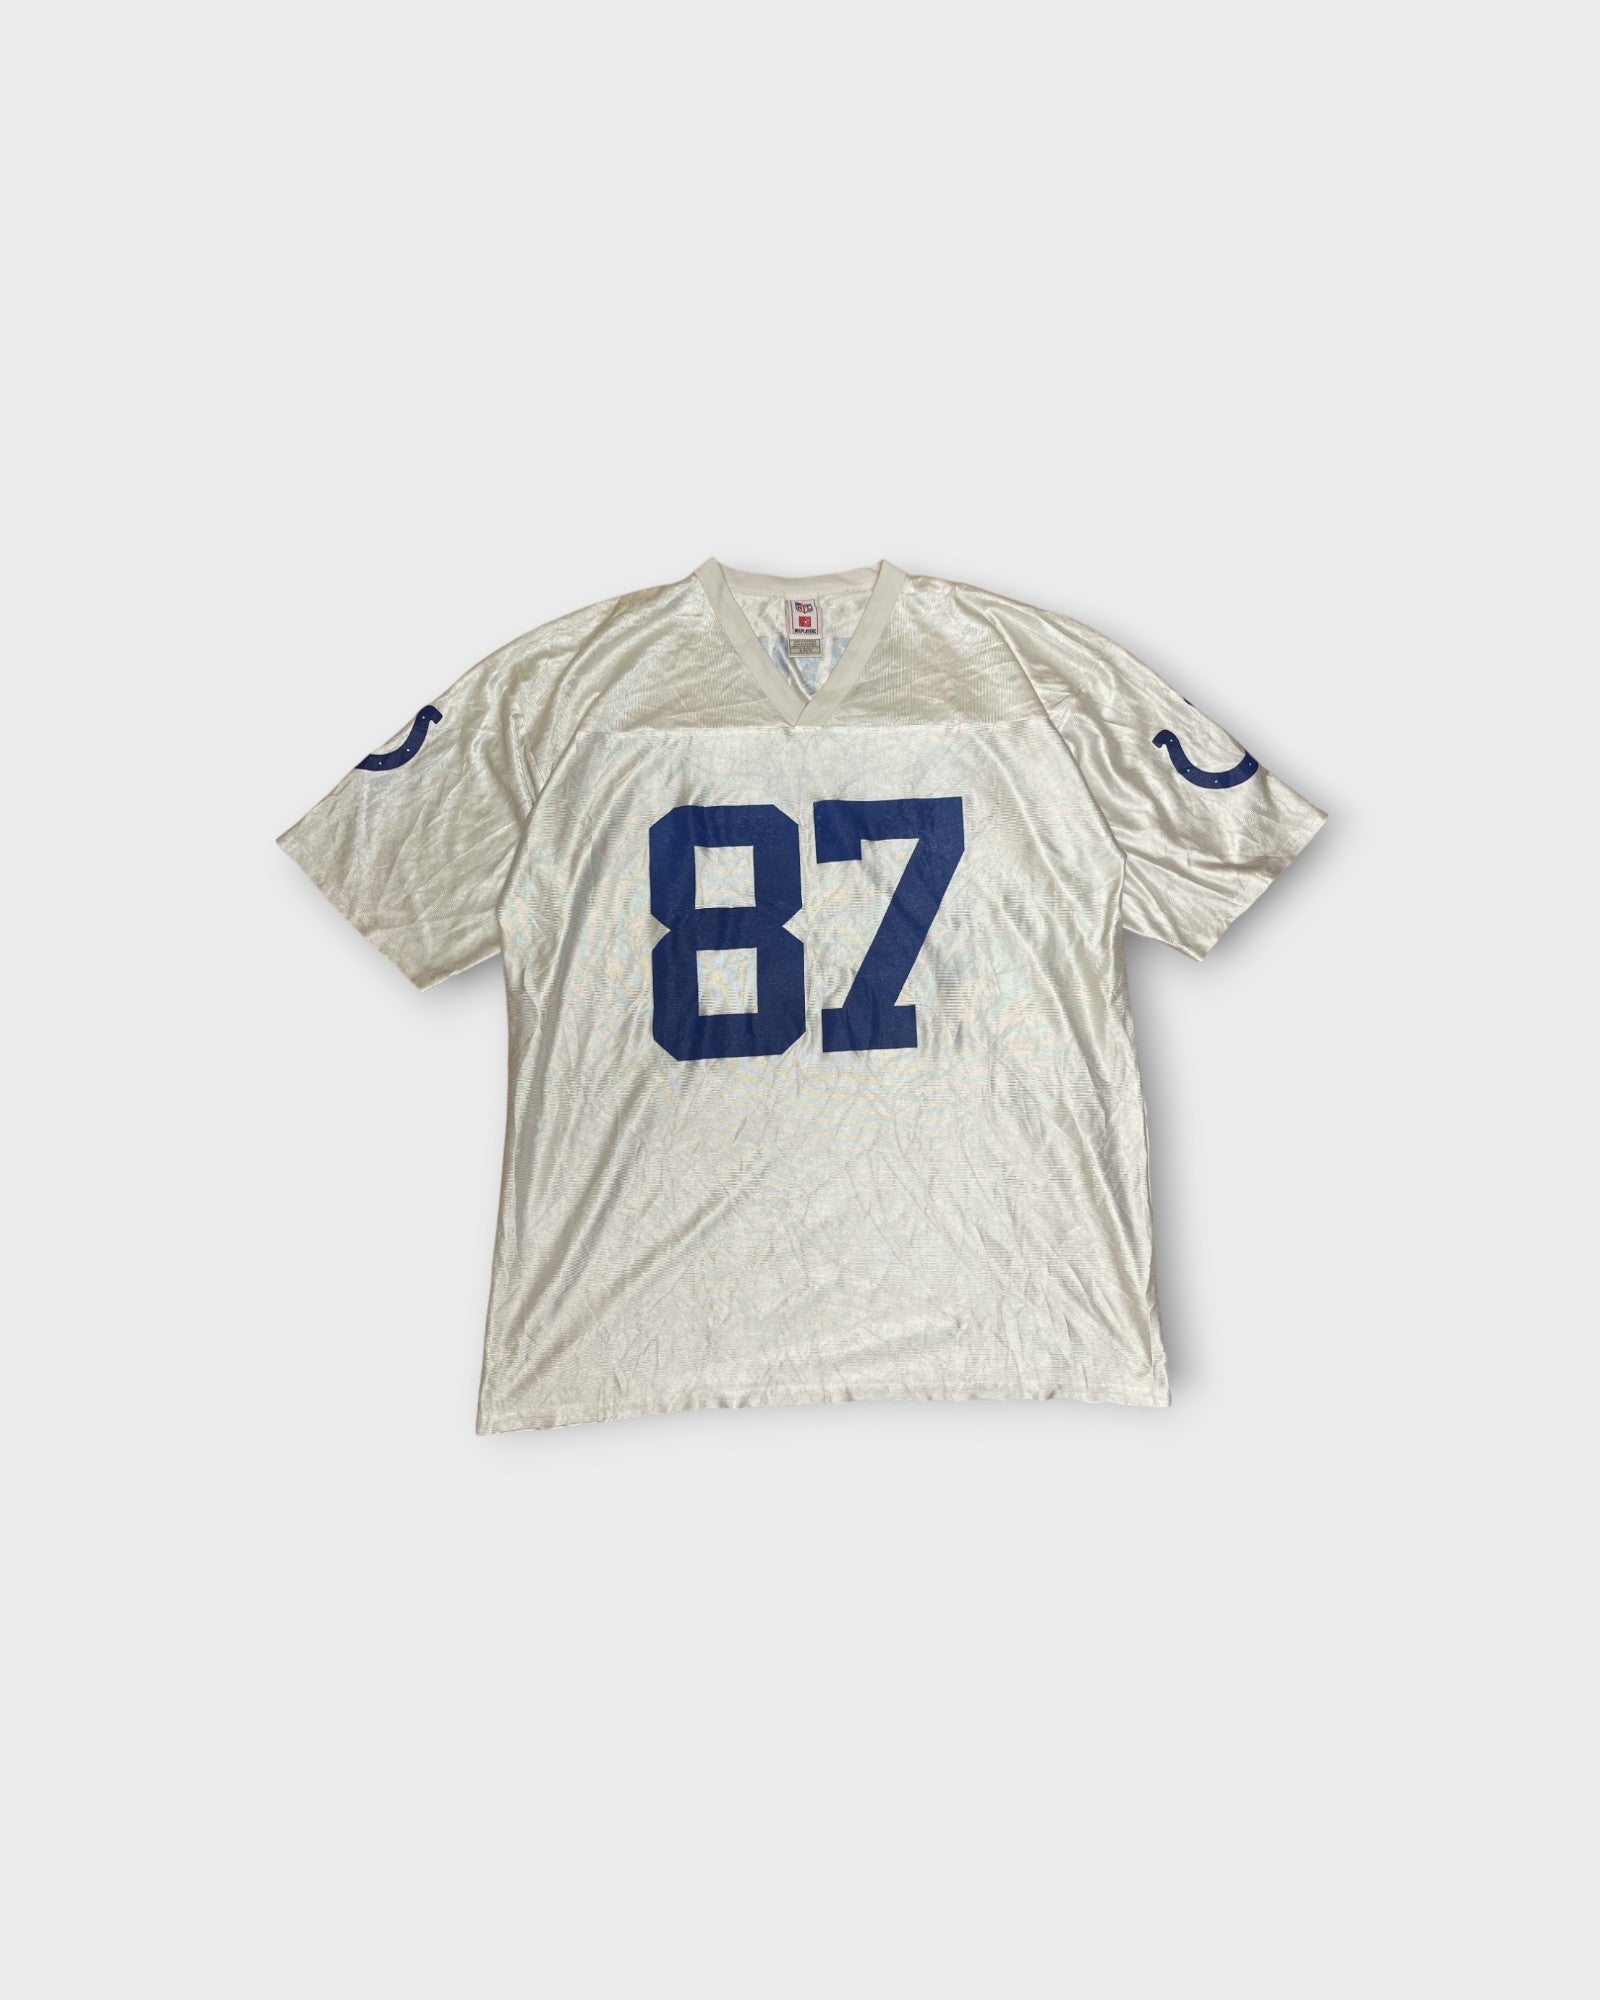 Vintage Majestic Indianapolis Colts Sports Jersey - XL